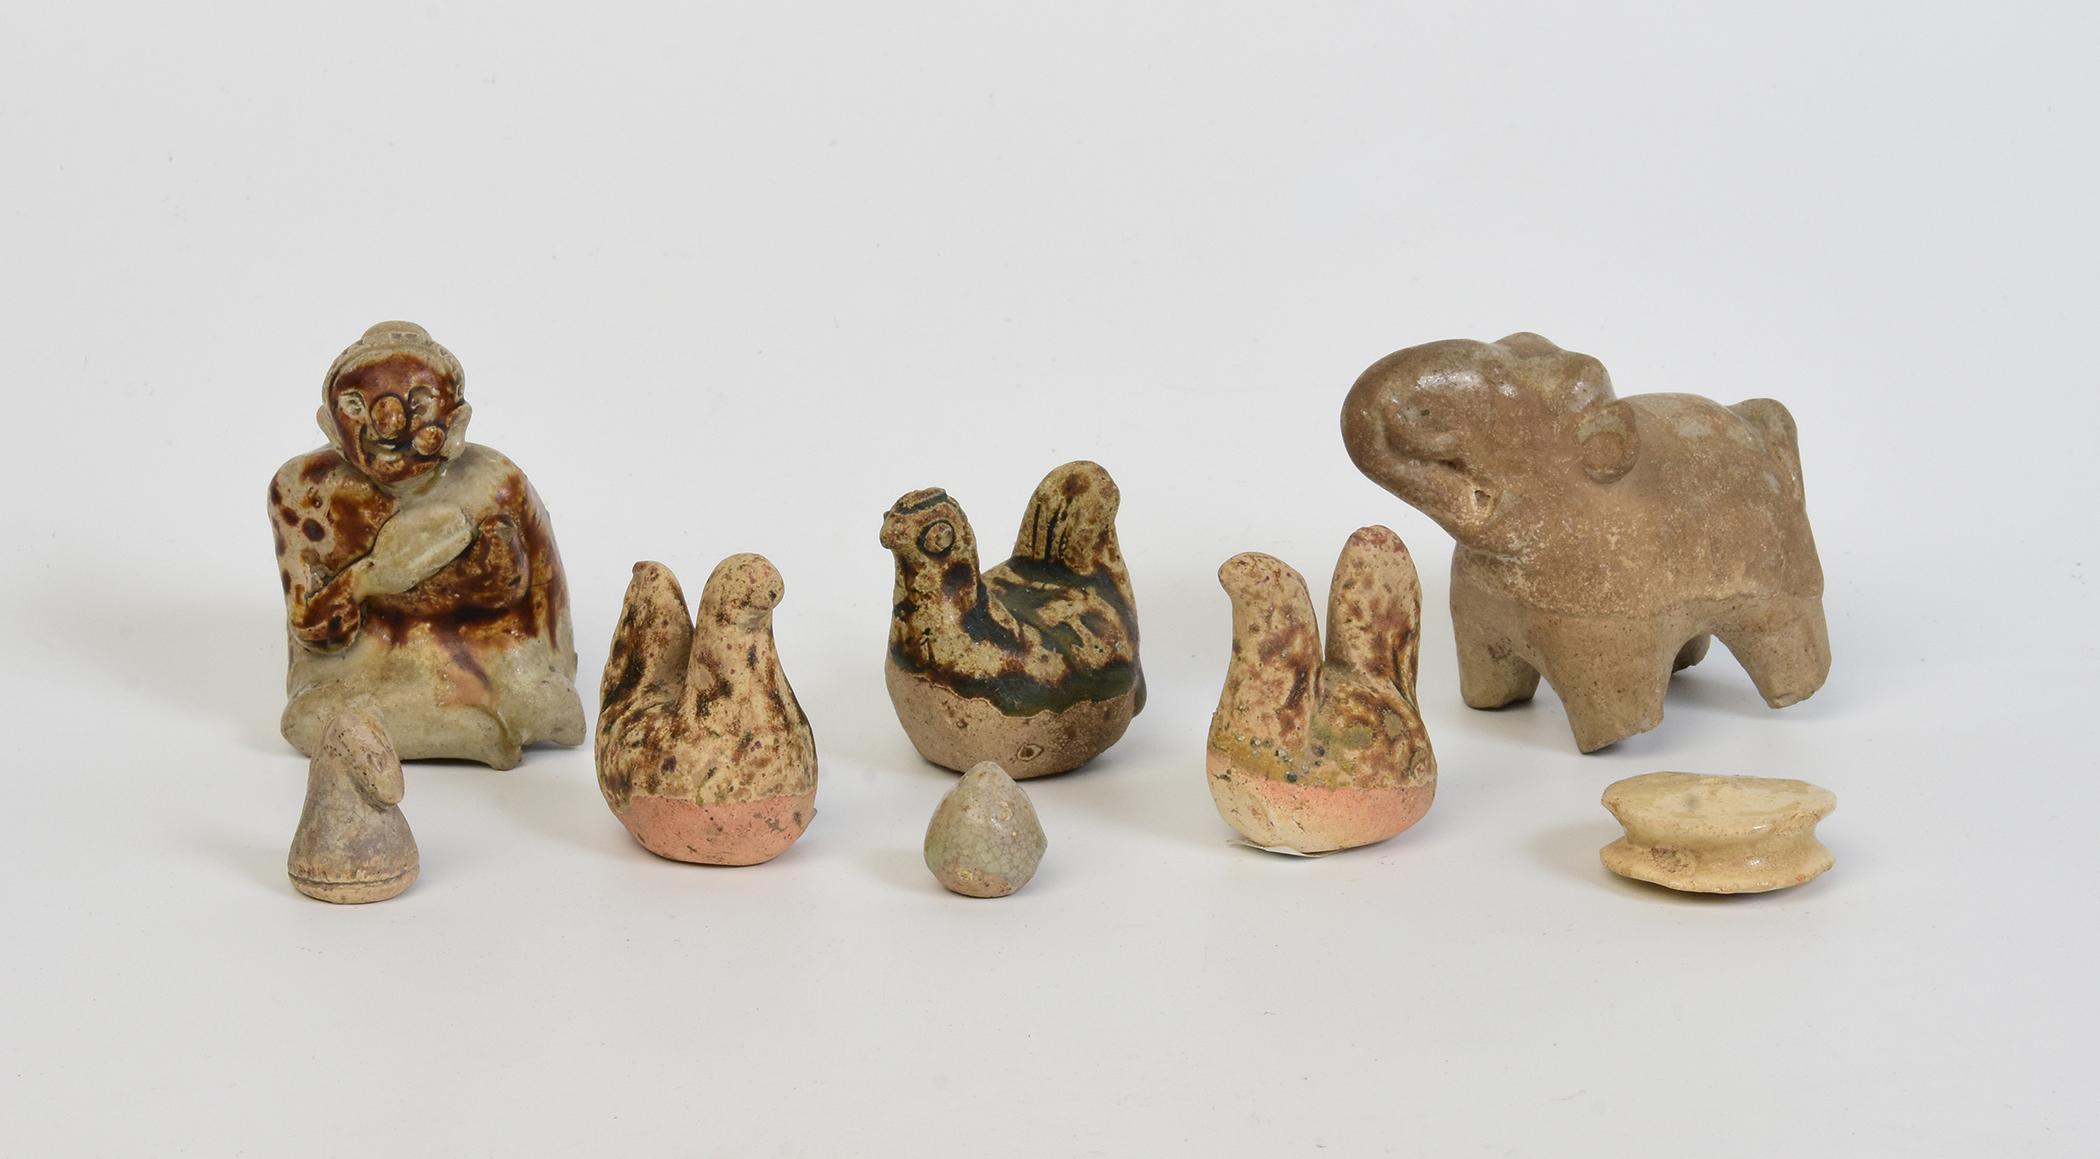 A set of antique Thai miniature Sukhothai stoneware ceramic figures of human and animal elephant, horse and roosters.

Age: Thailand, Sukhothai Period, 14th - 16th Century
Size of figures: Height 1.9 - 6.5 C.M. / Width 1.7 - 4.5 C.M.
Size of stand: